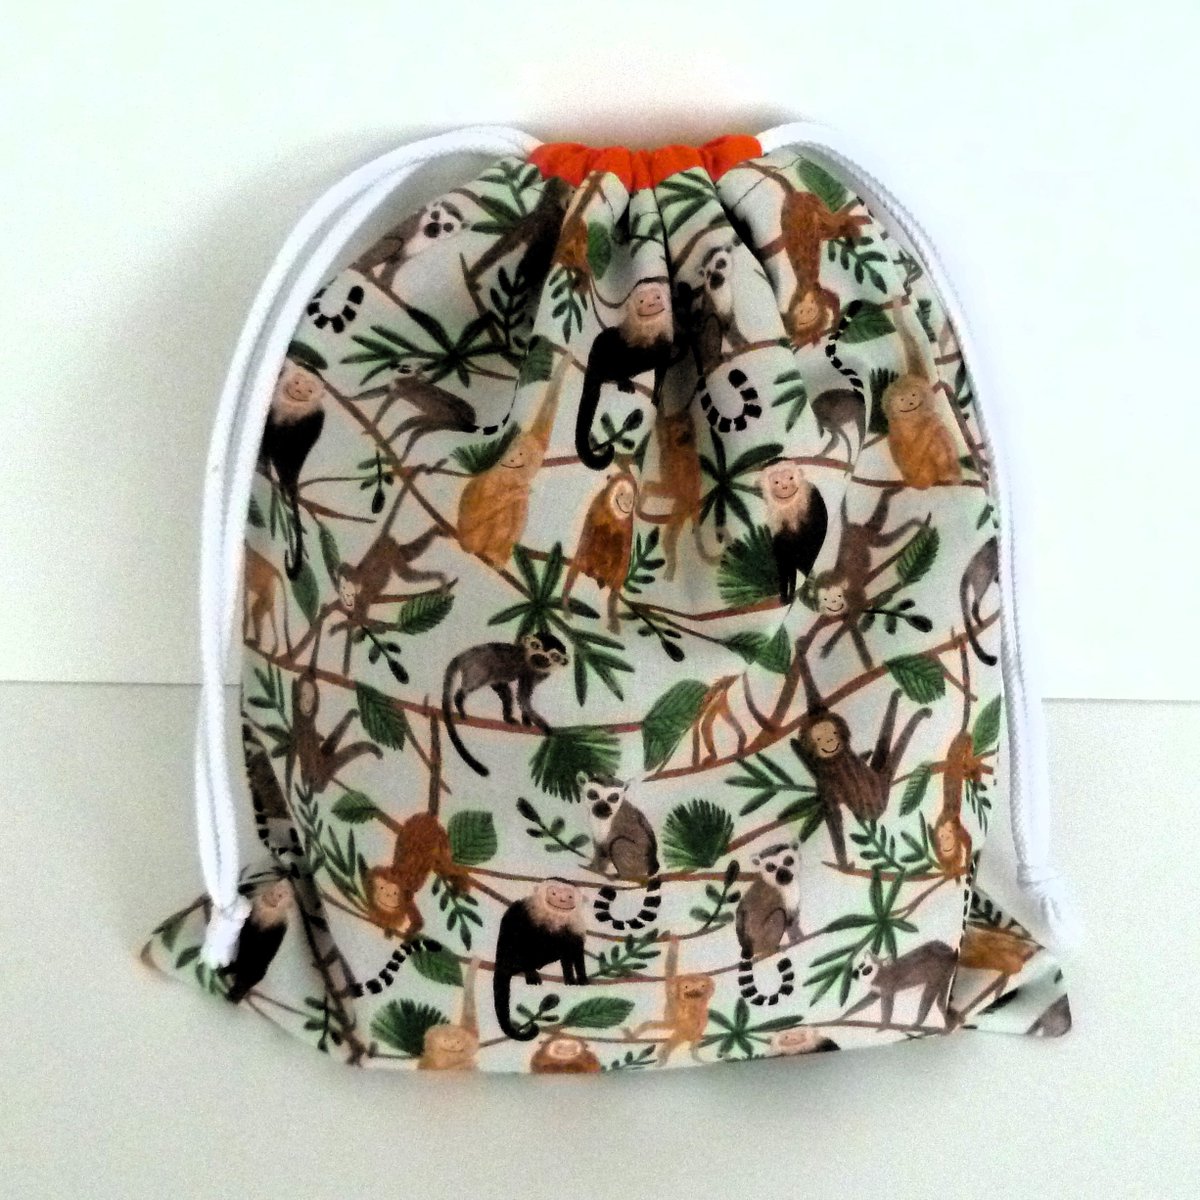 daisychaincraftsukgb.etsy.com/listing/166179… Drawstring Bag Cotton, Monkey fabric design, Handmade, Fully lined, Reusable Gift Sack, Travel Pouch